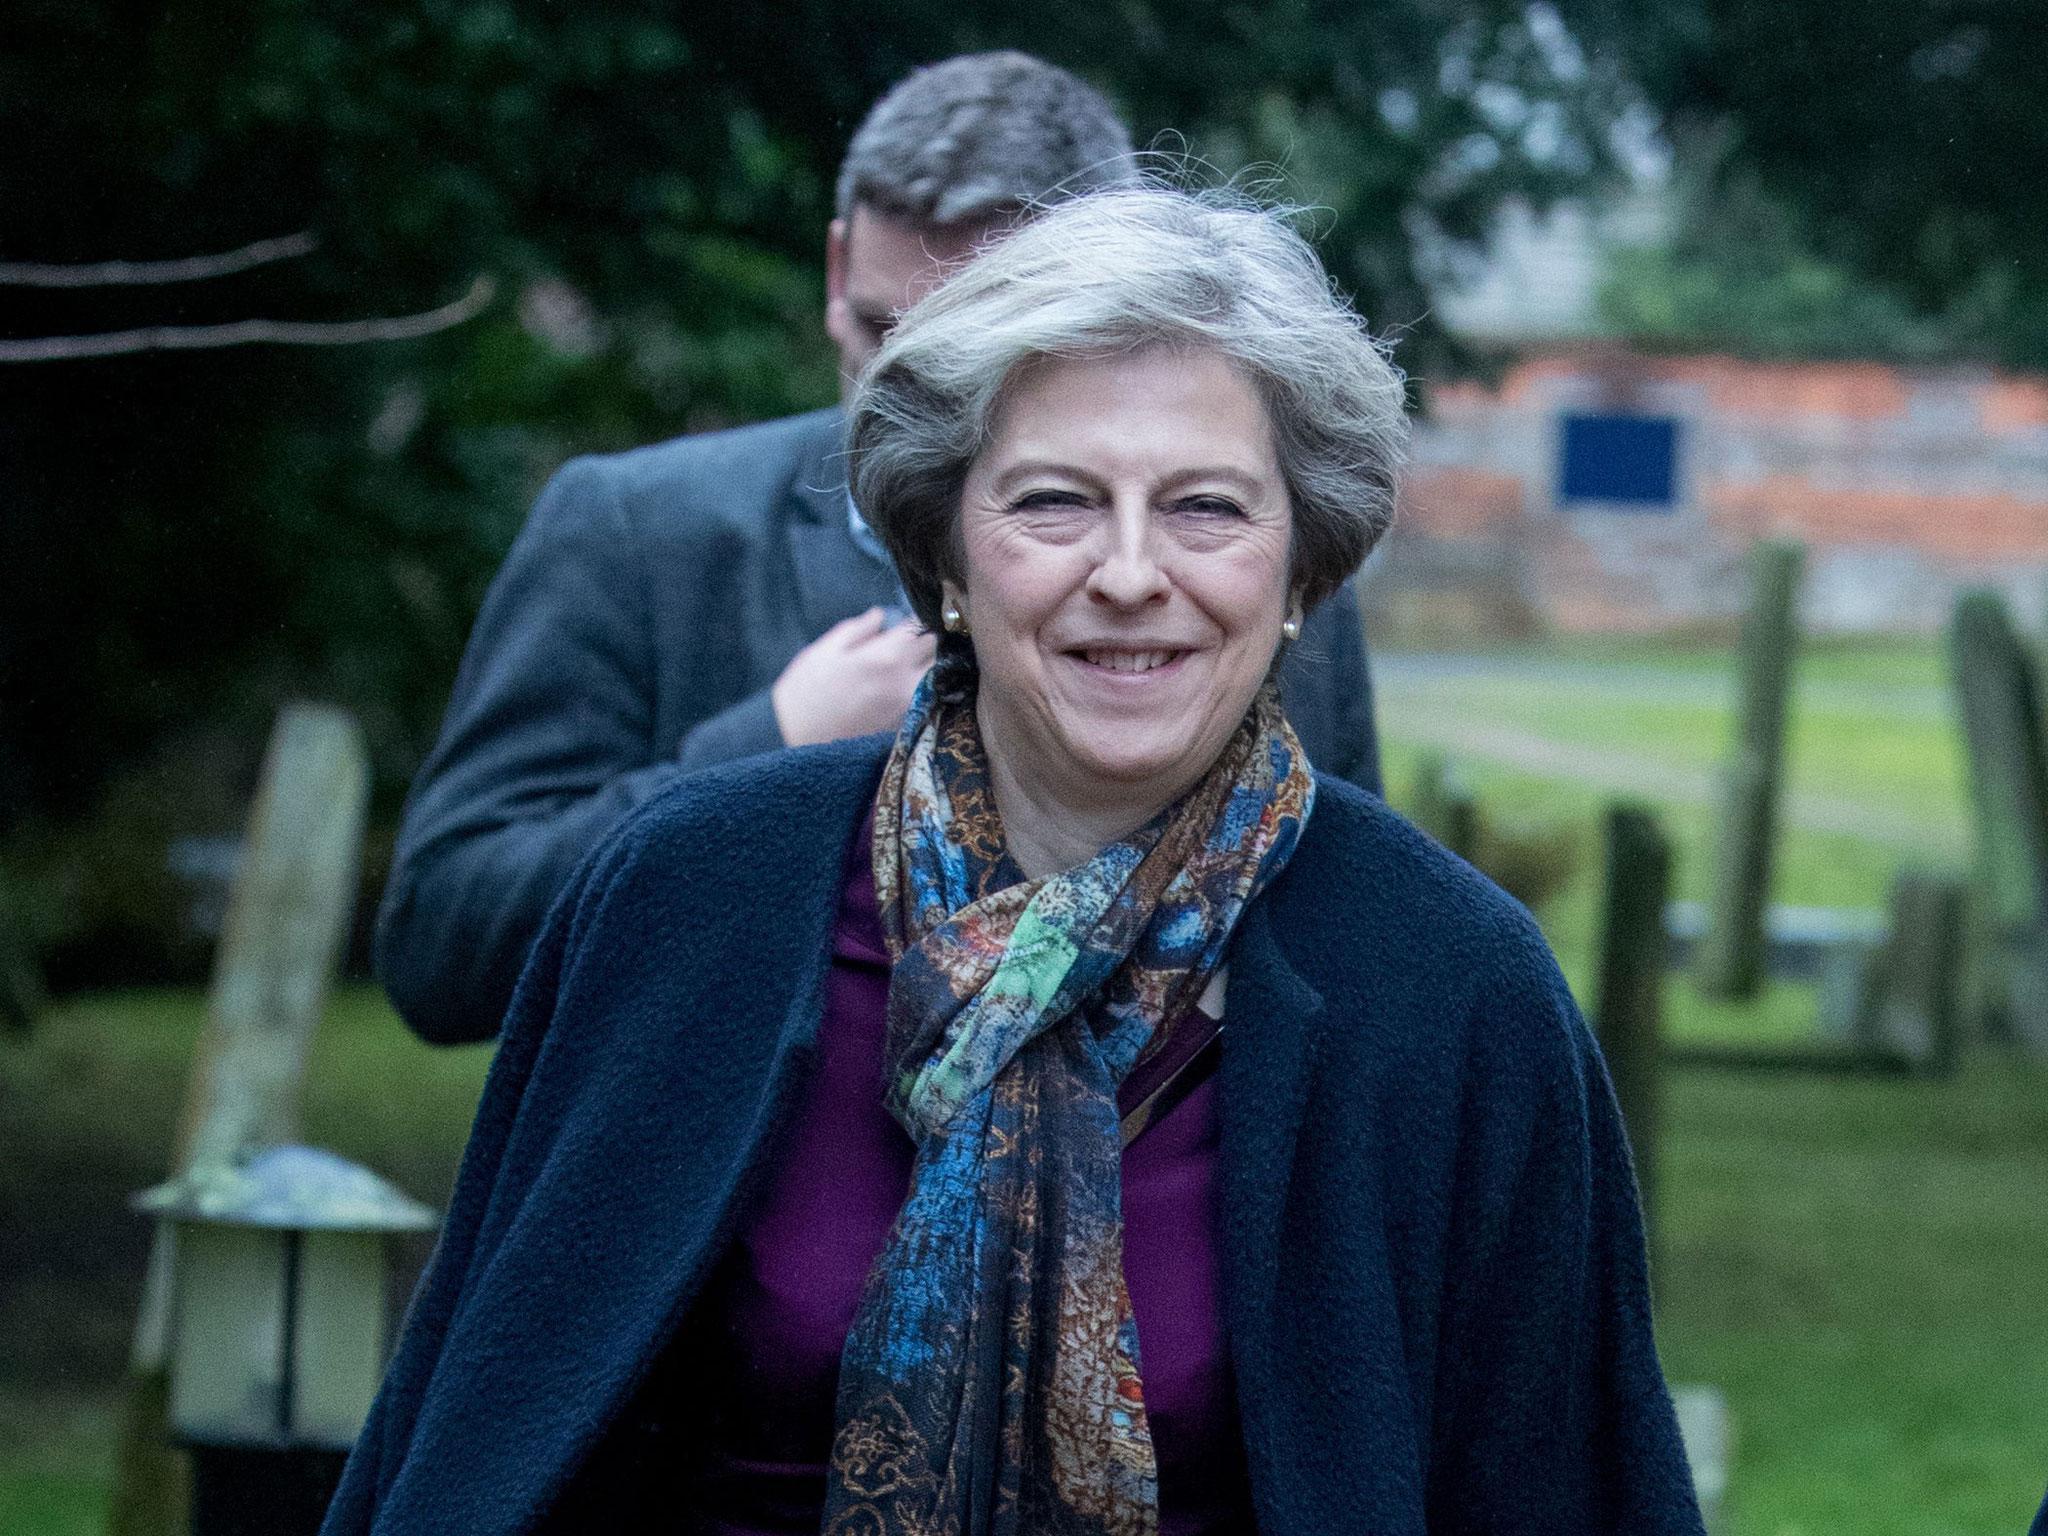 Theresa May pictured on Christmas Day attending a service at St Andrew's Church